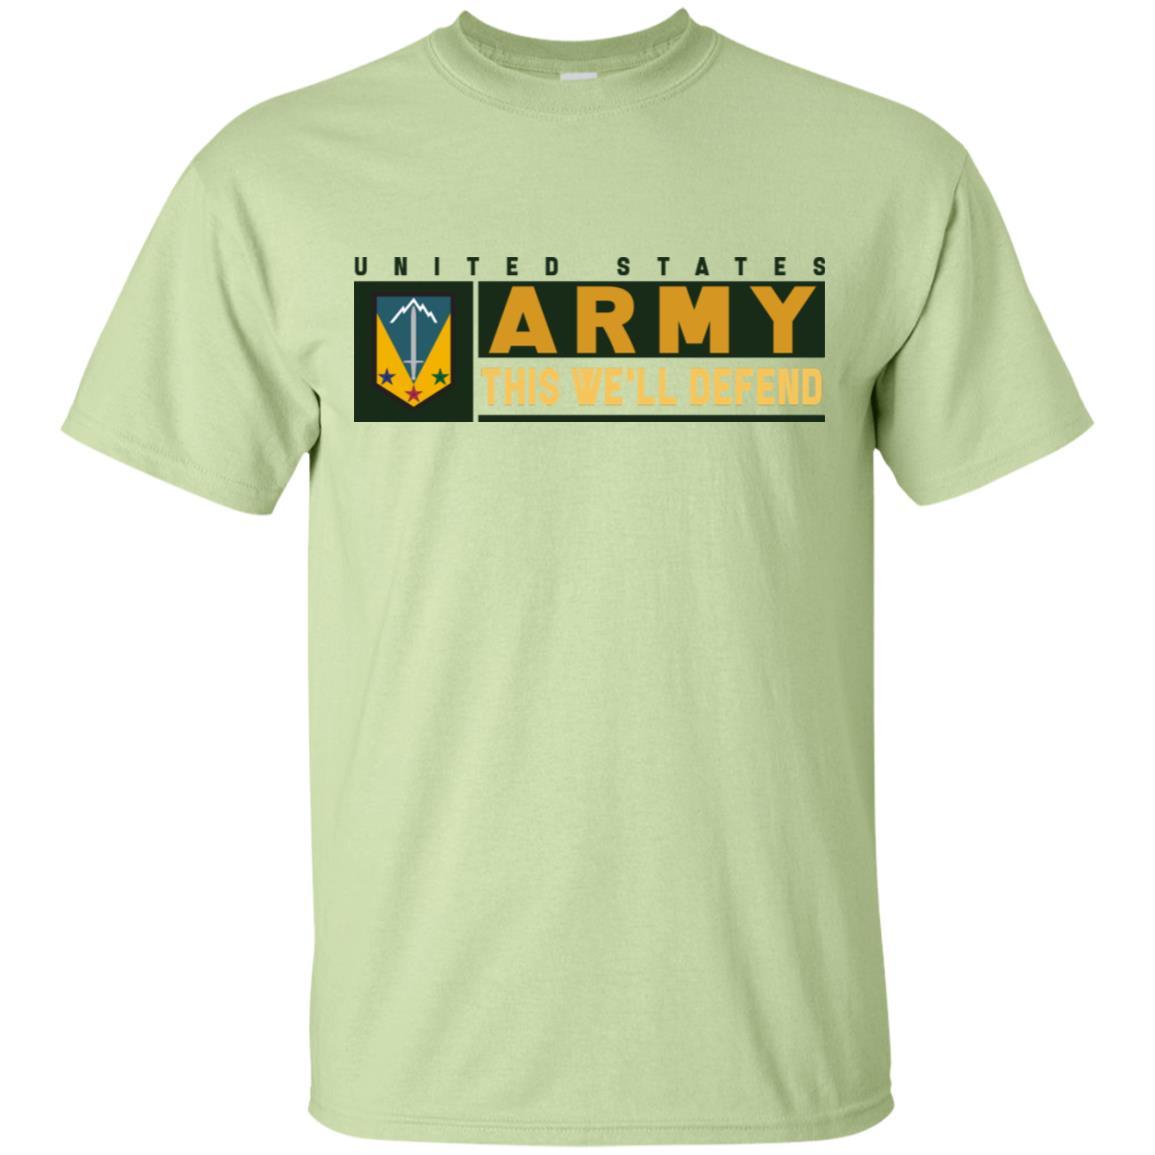 US Army 3RD MANEUVER ENHANCEMENT BRIGADE- This We'll Defend T-Shirt On Front For Men-TShirt-Army-Veterans Nation